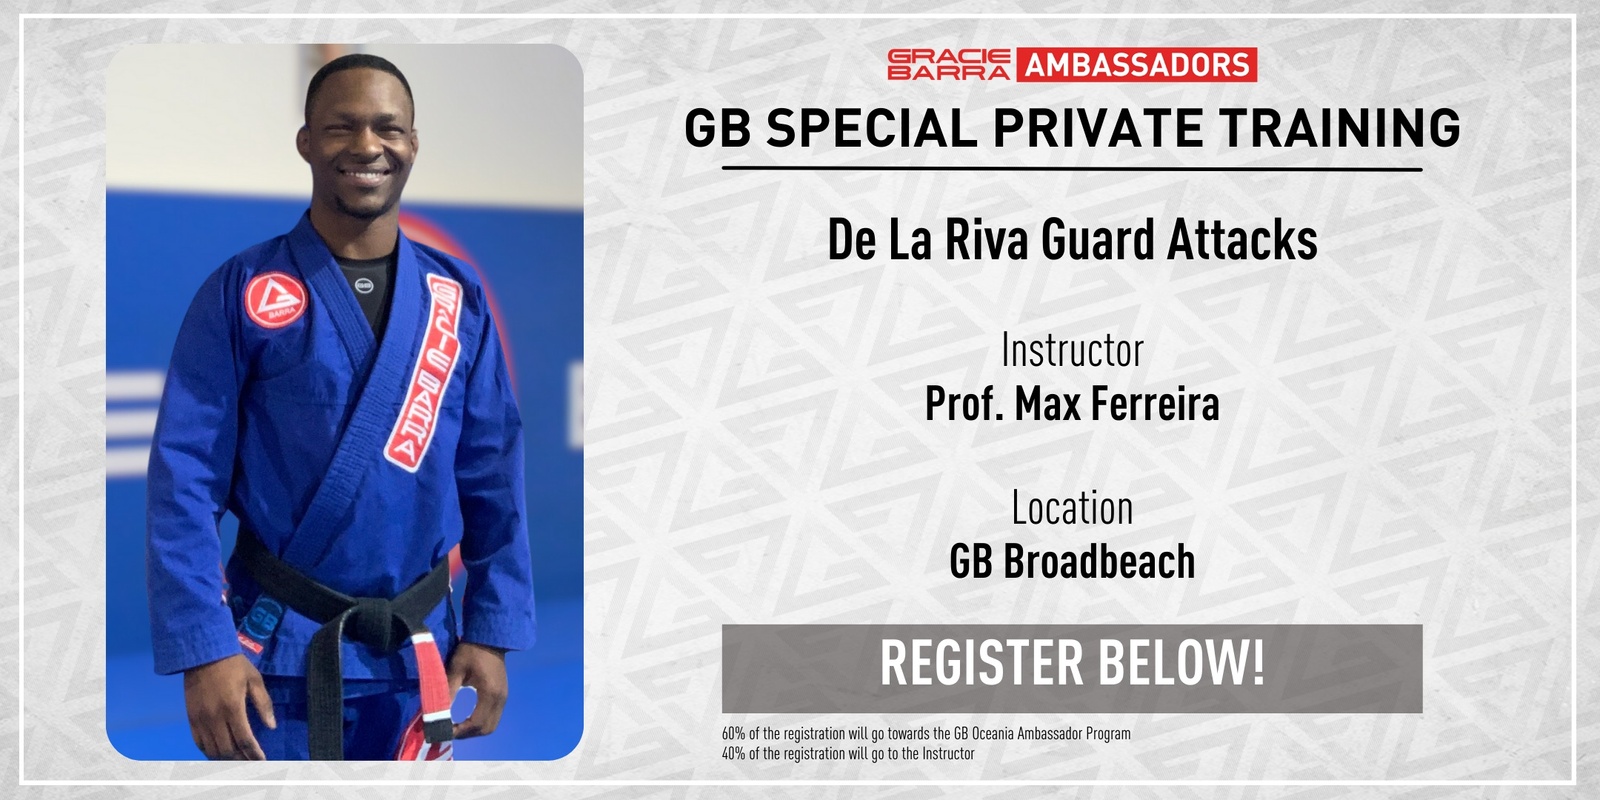 Banner image for GB Special Private Training - GB Broadbeach